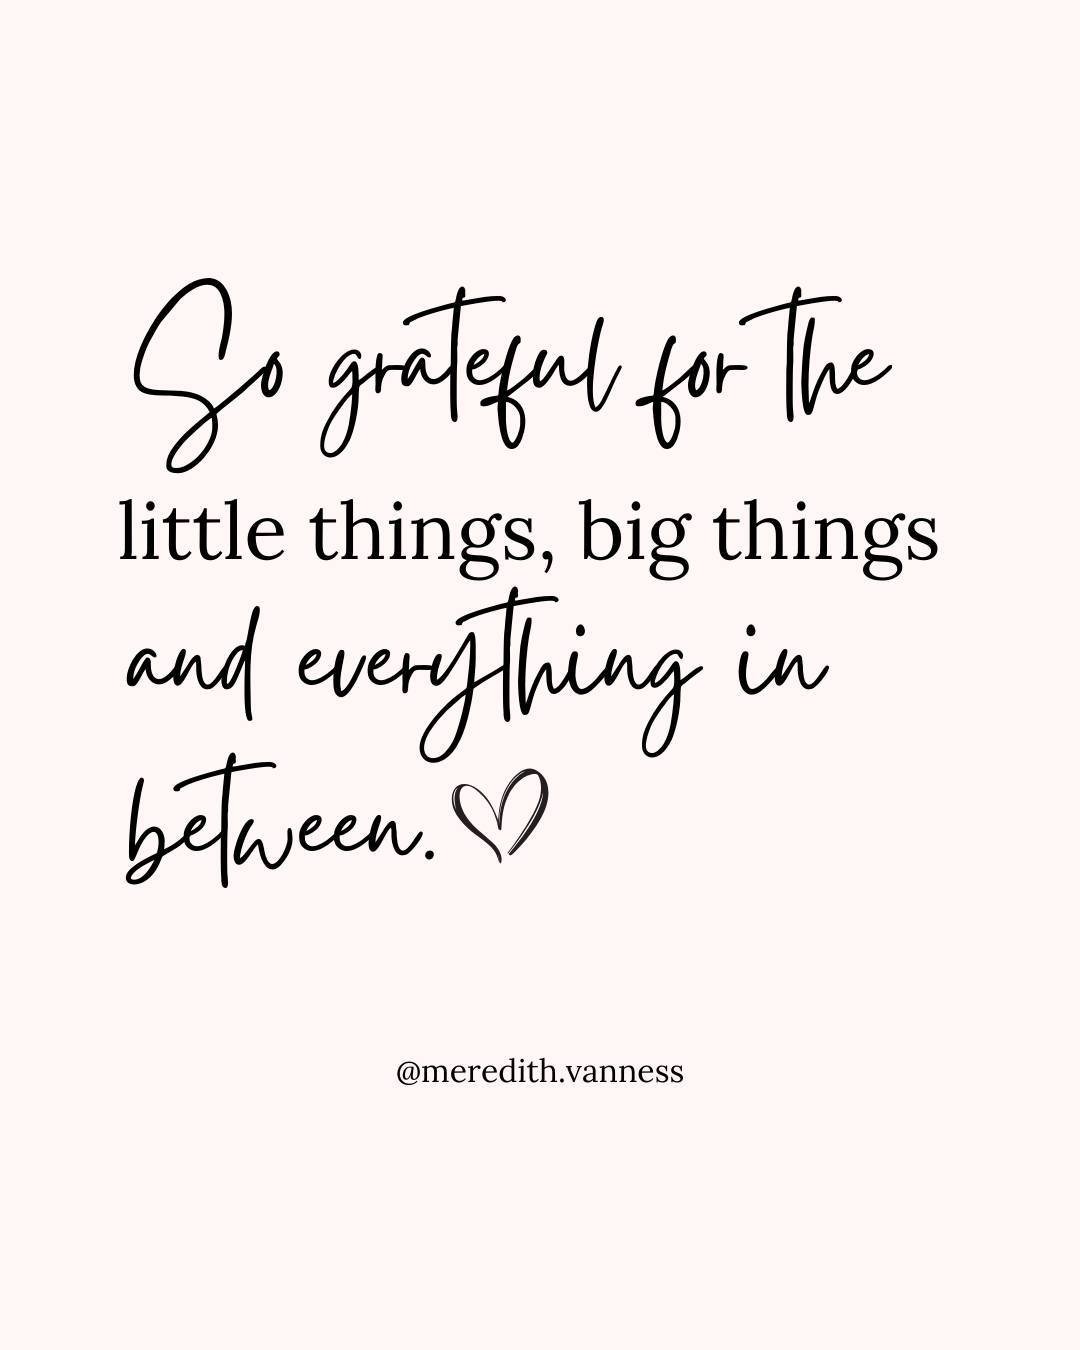 Gratitude rewires your brain to focus on the good, boosting happiness, reducing stress, and strengthening relationships.⁠
⁠
Think of it like a muscle. The more you use it, the stronger it gets. Here are some ways to flex your gratitude muscle:⁠
⁠
Sta